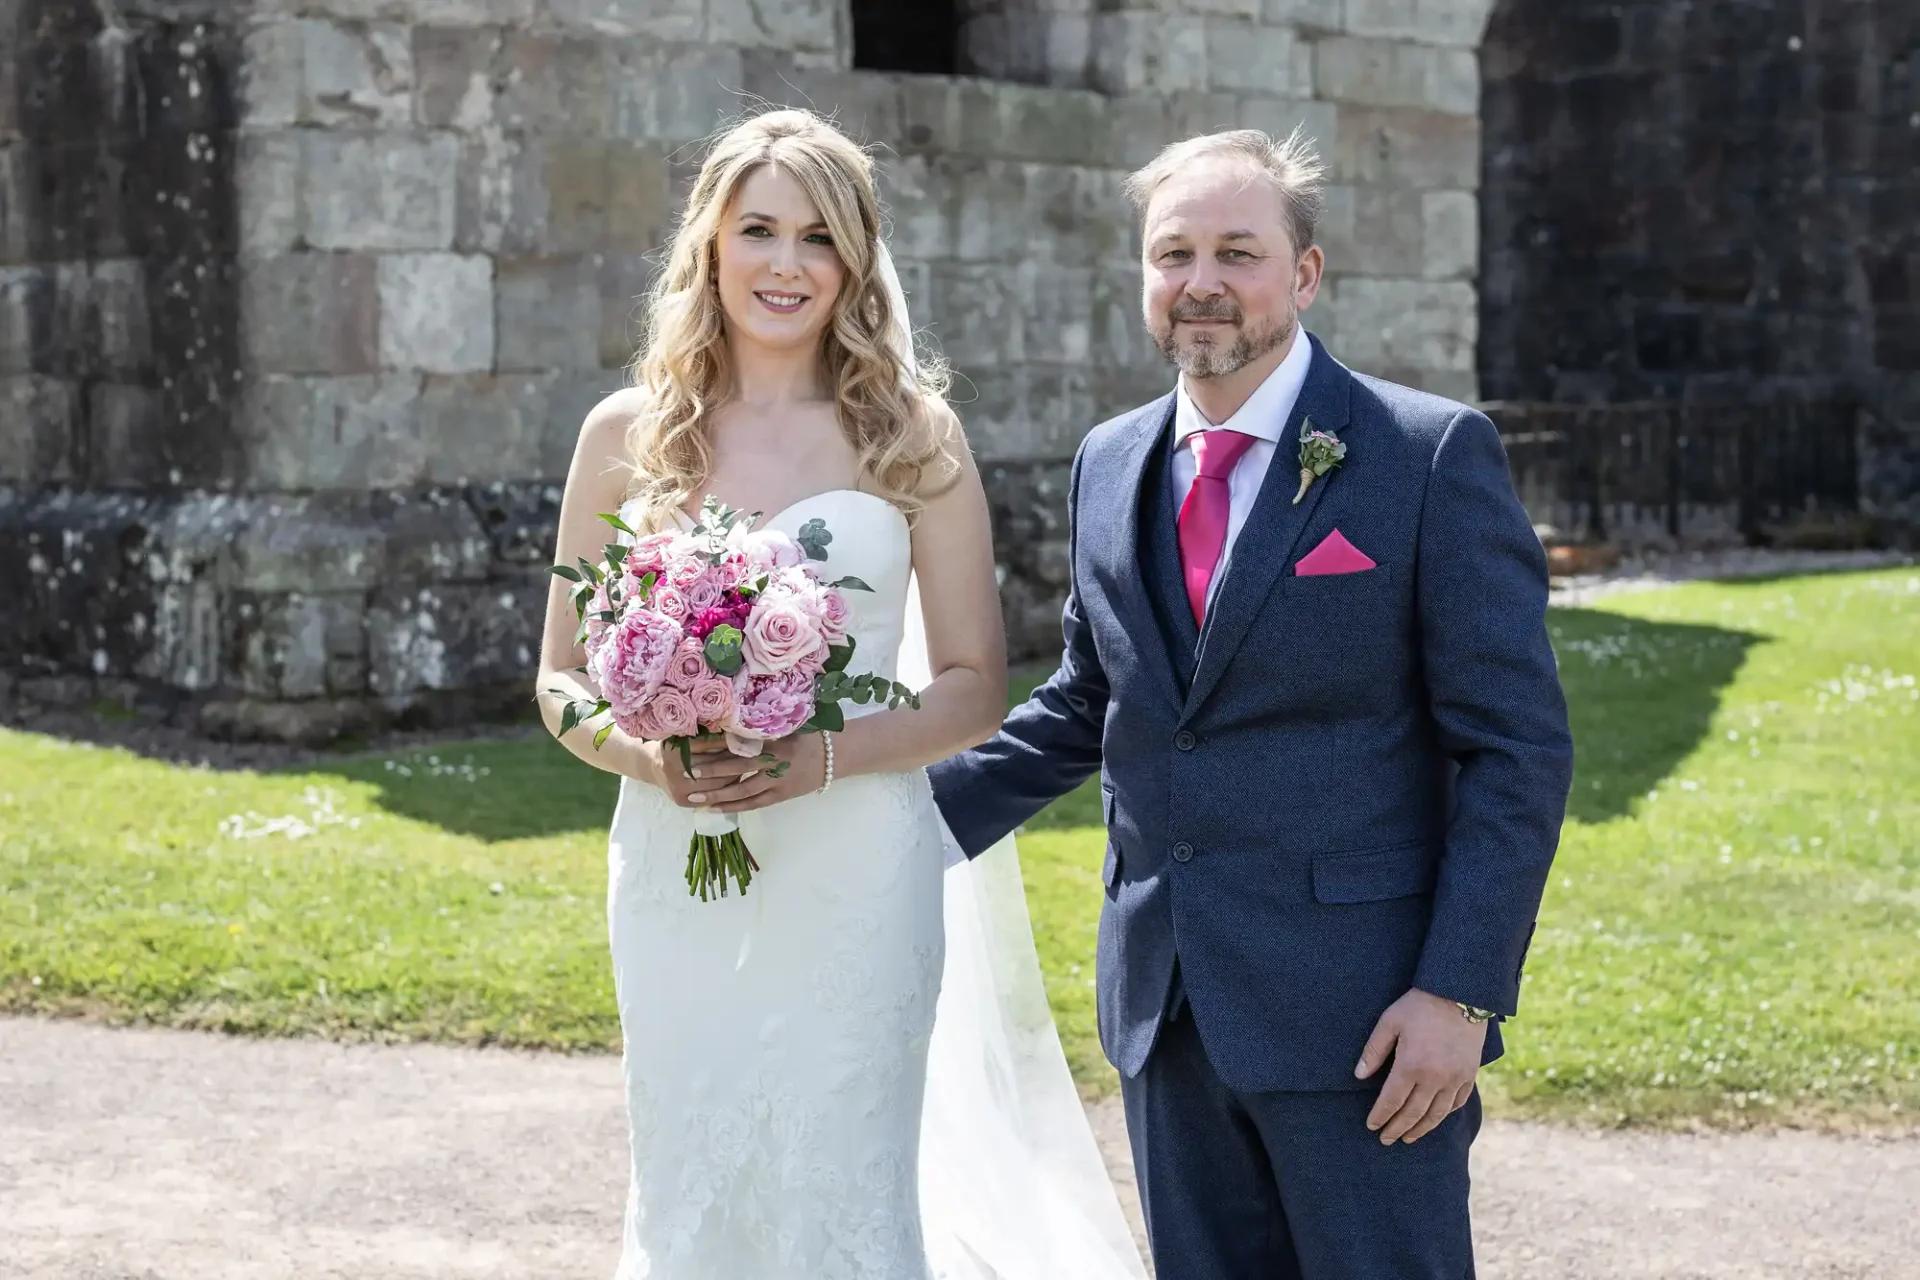 A bride and groom smiling in formal wedding attire, holding hands in front of a stone building, with the bride holding a bouquet of pink flowers.